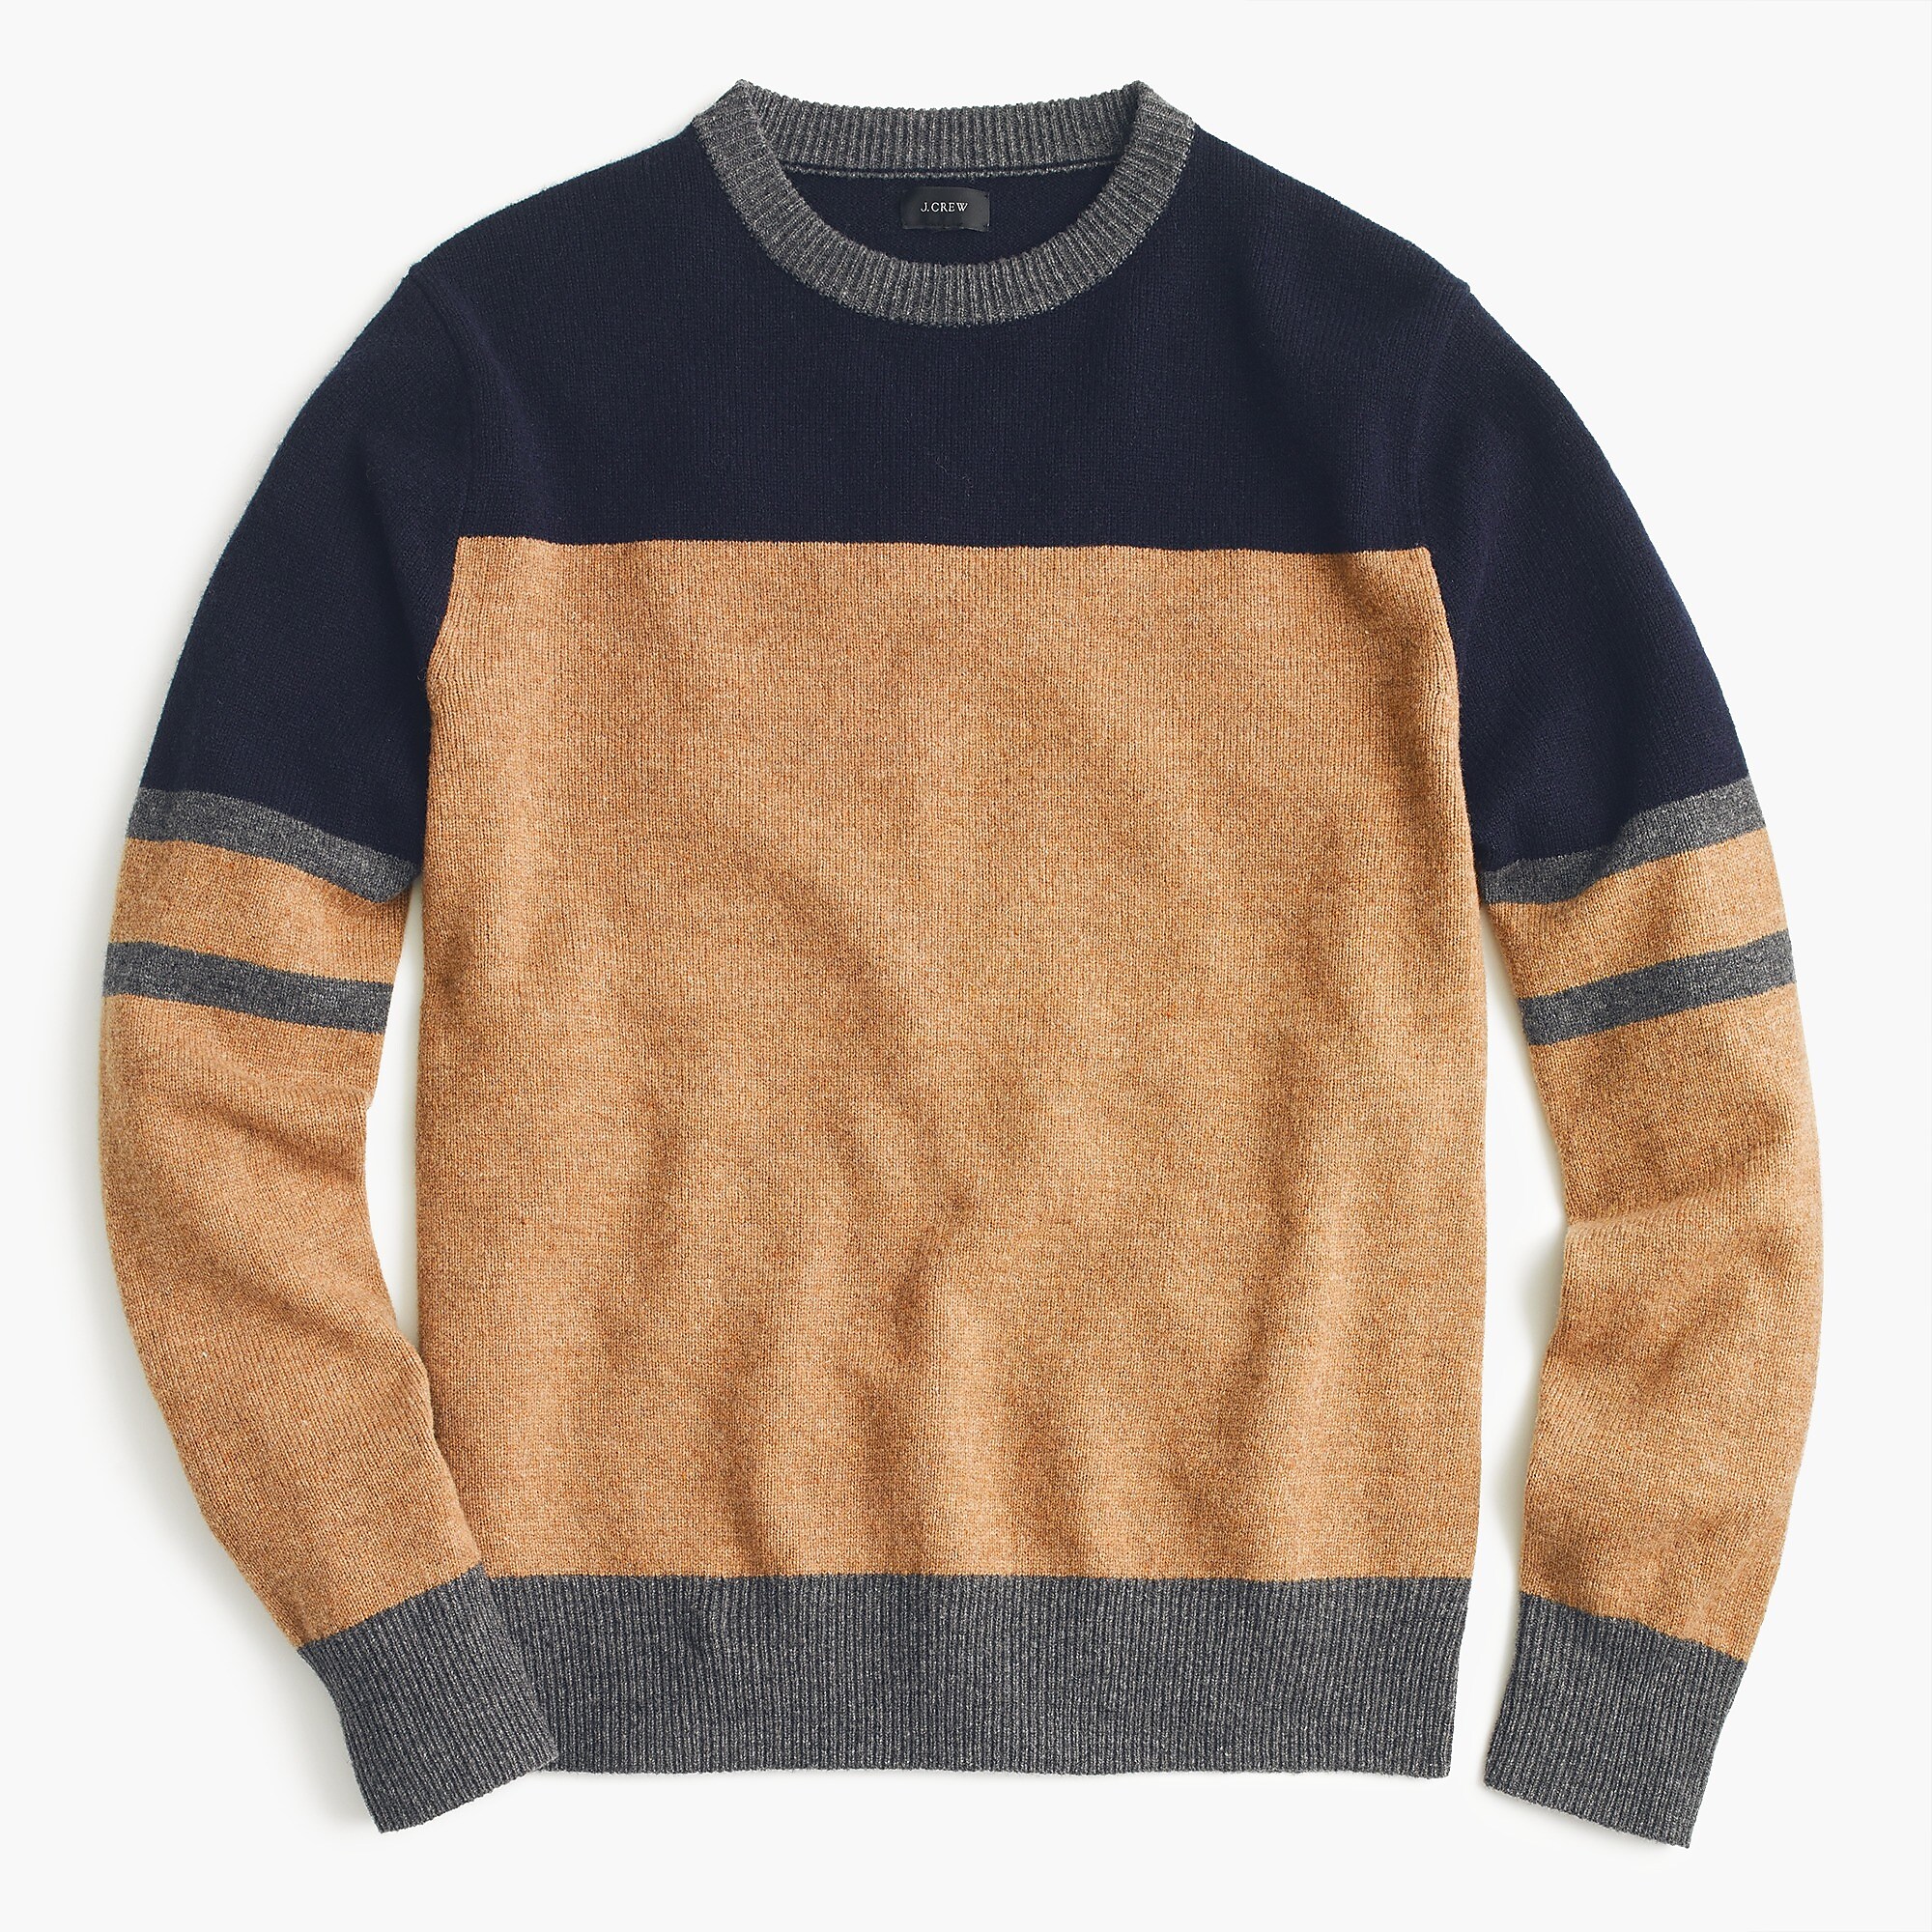 Shop J.Crew for the Lambswool crewneck sweater in colorblock for Men. 